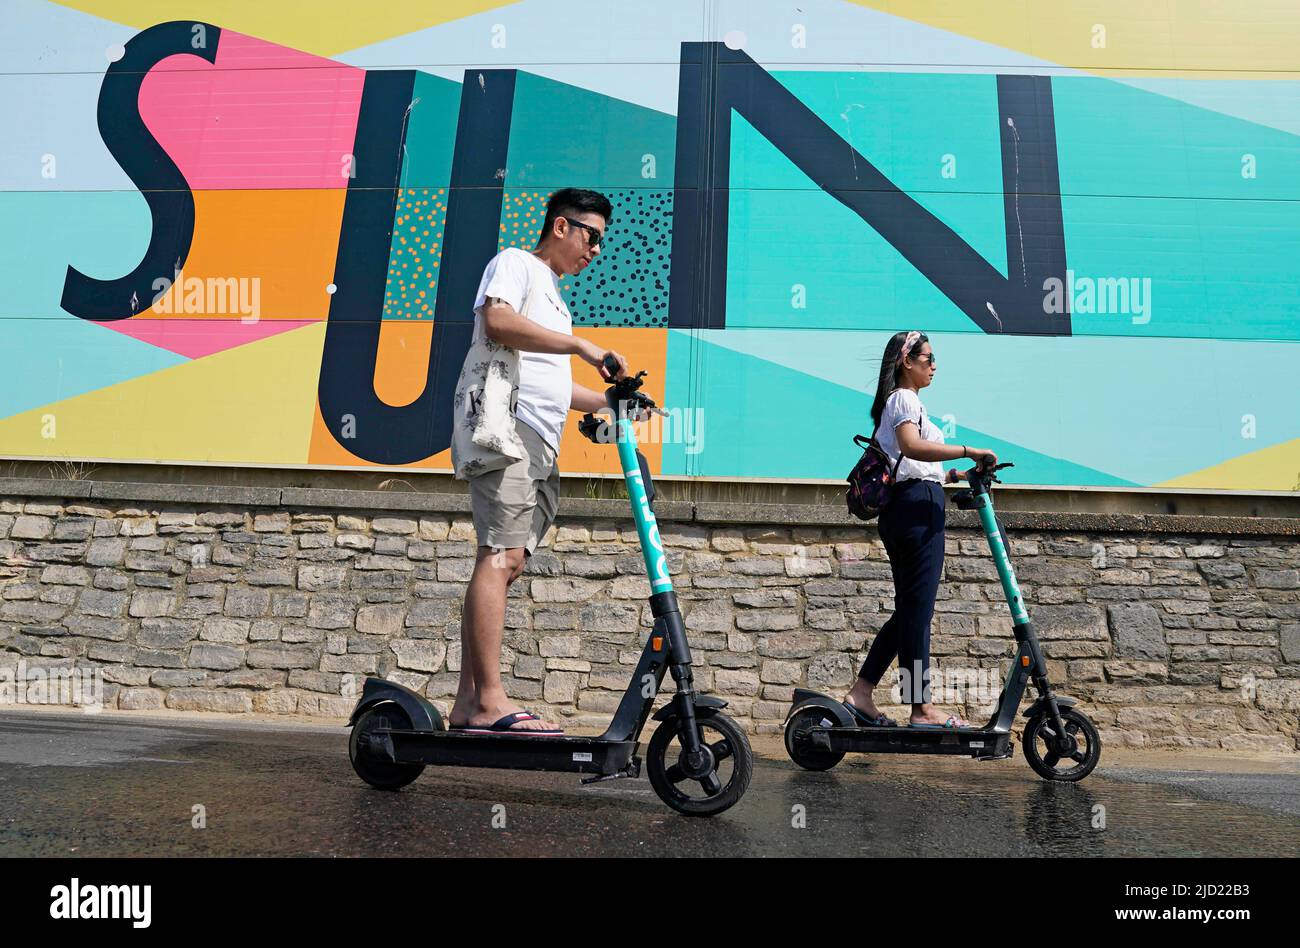 People scooter past a sign at Boscombe Beach in Dorset. A sweltering 34C  (93.2F) is expected in London and potentially some spots in East Anglia on  Friday, according to the Met Office.